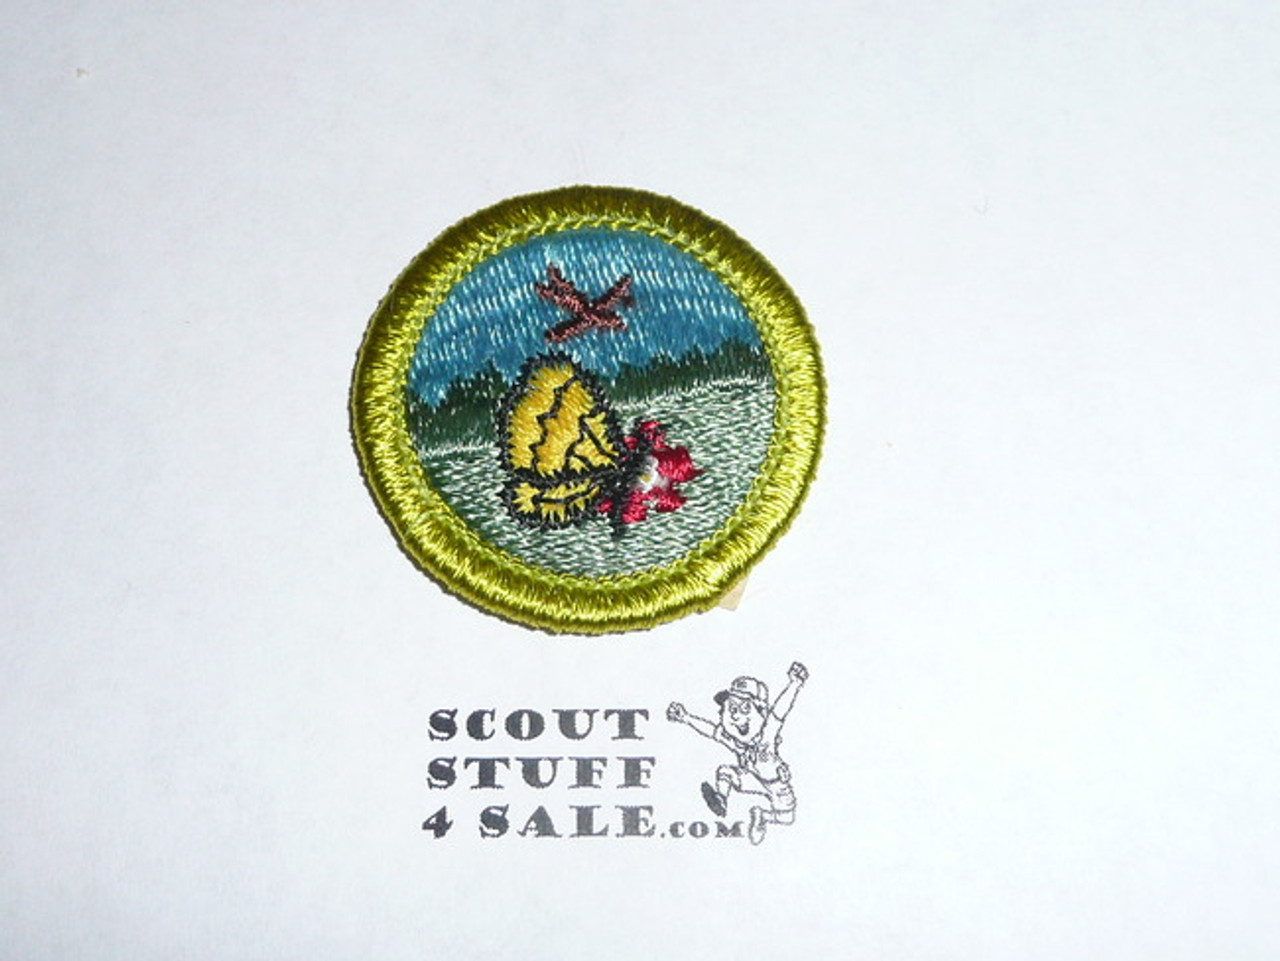 Nature (Green bdr) - Type H - Fully Embroidered Plastic Back Merit Badge (1972-2002)